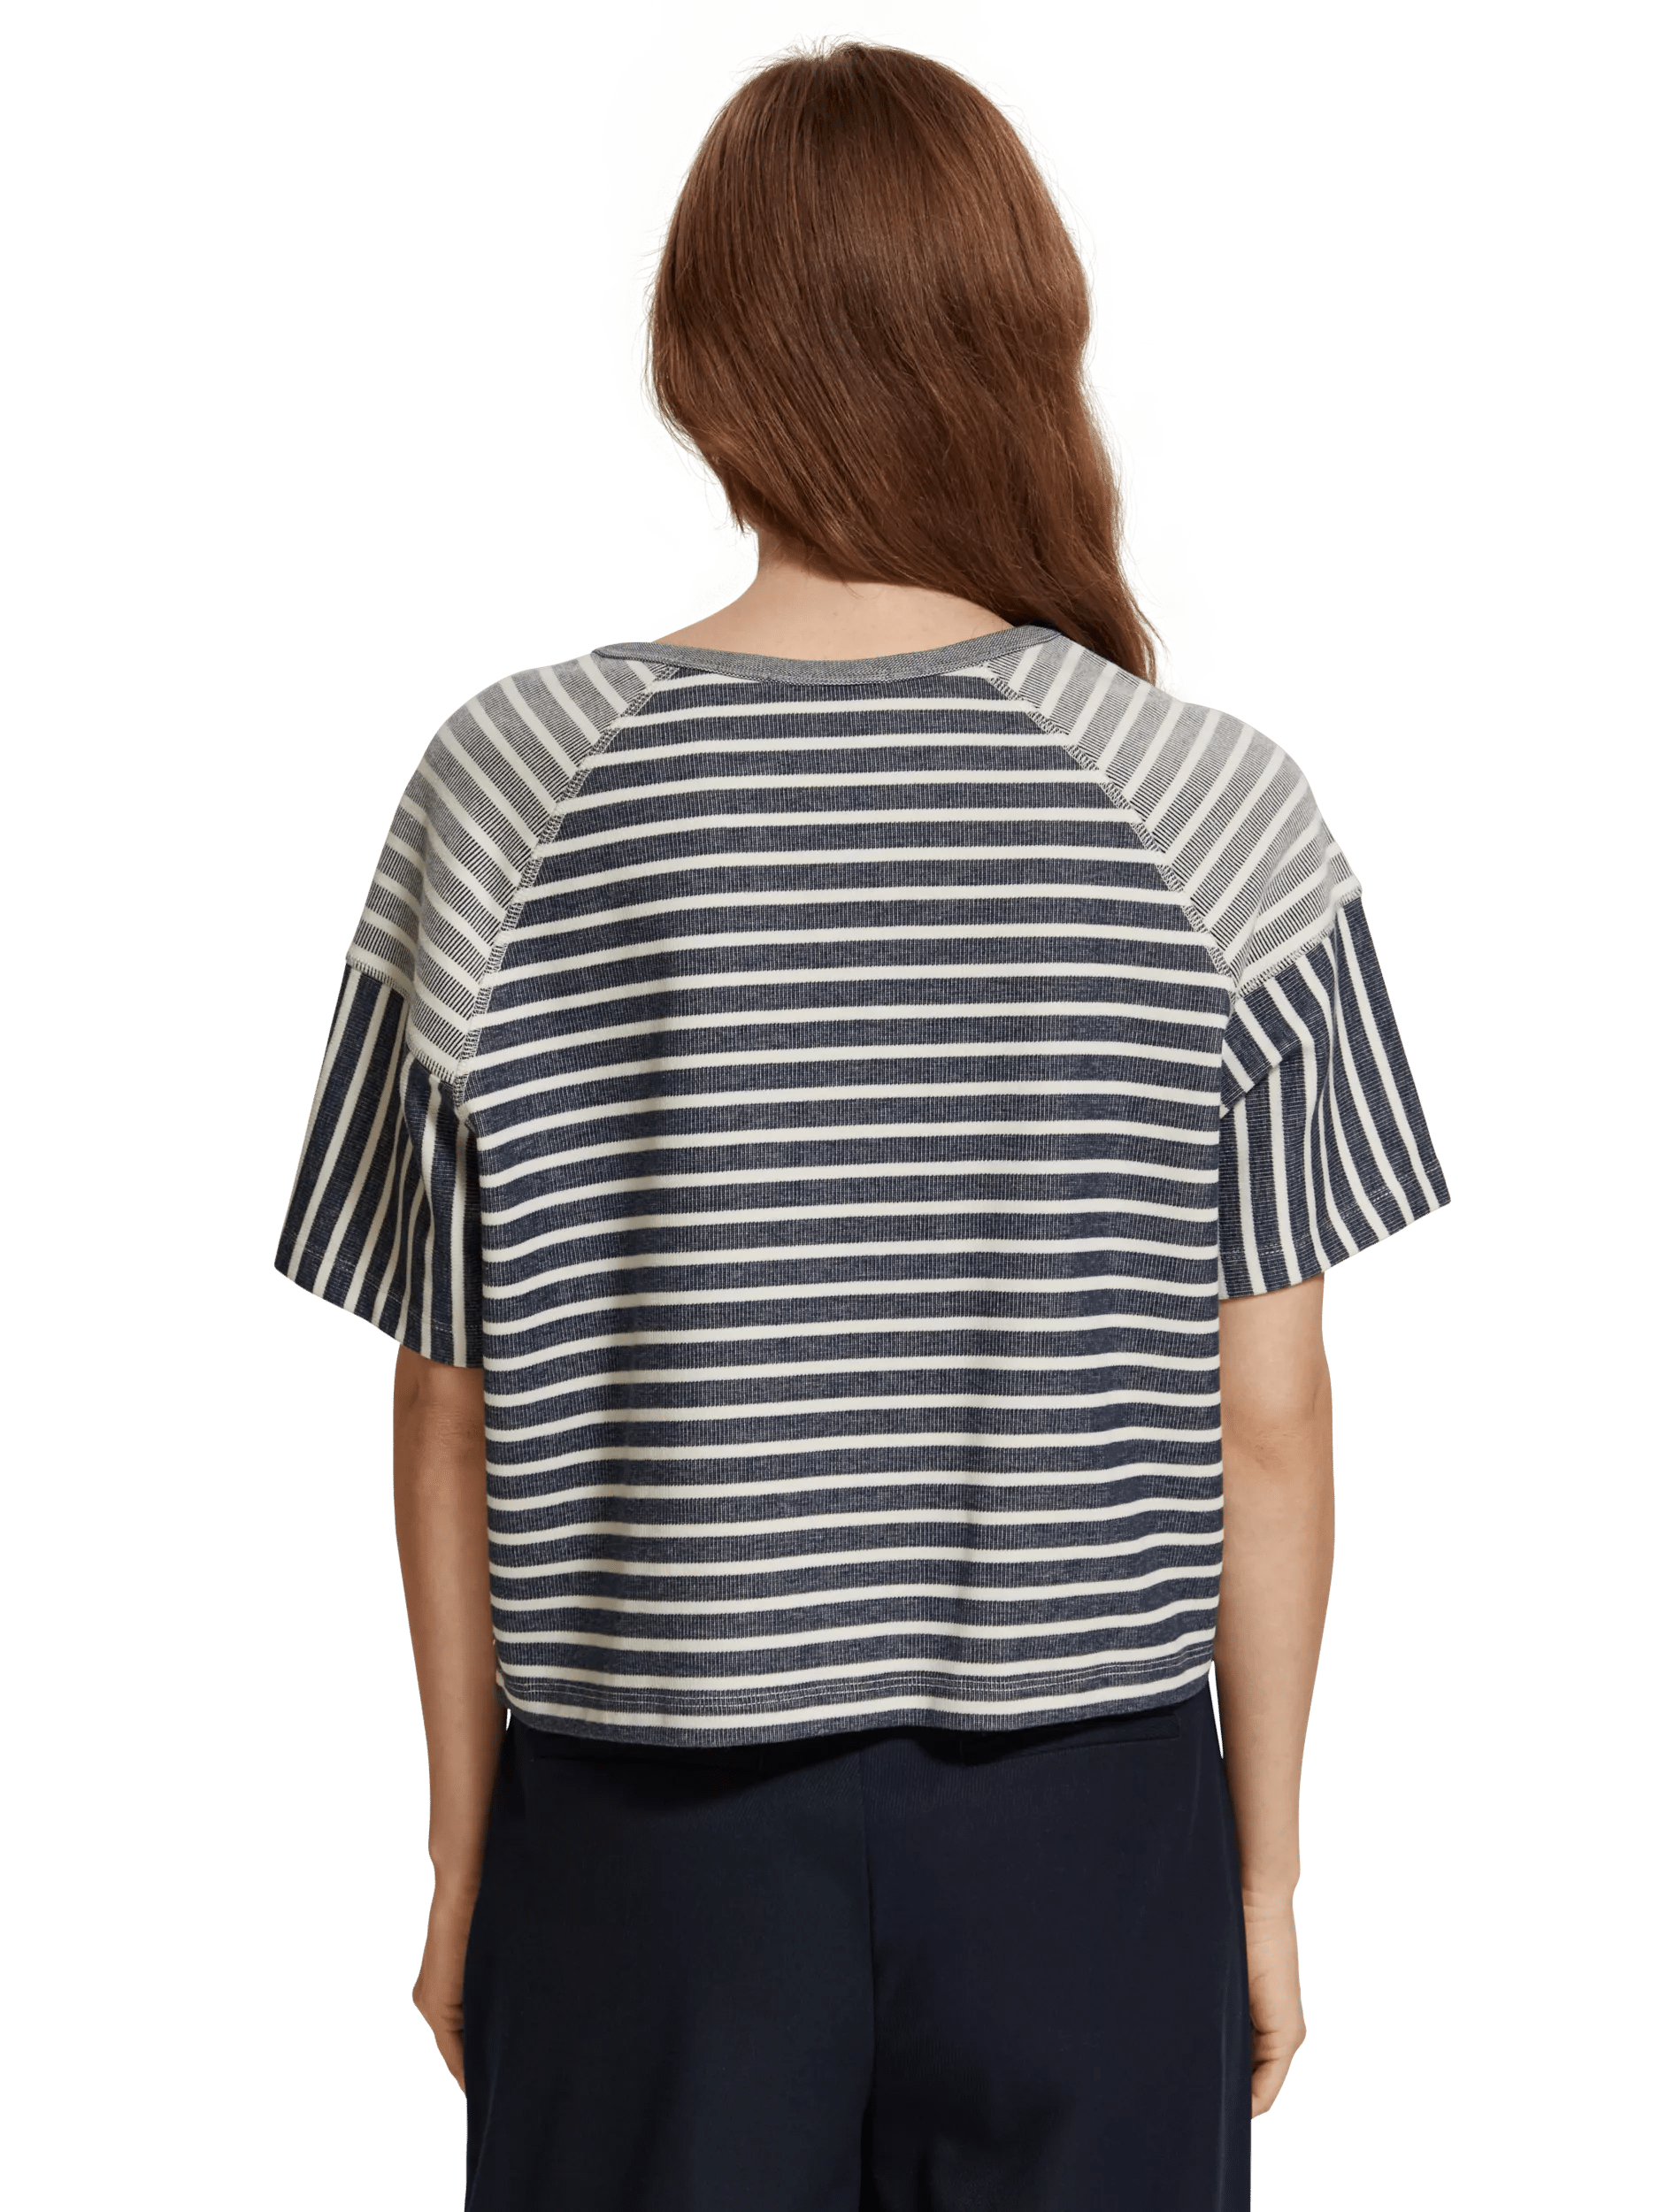 Striped boxy sweatshirt with lace-up detail